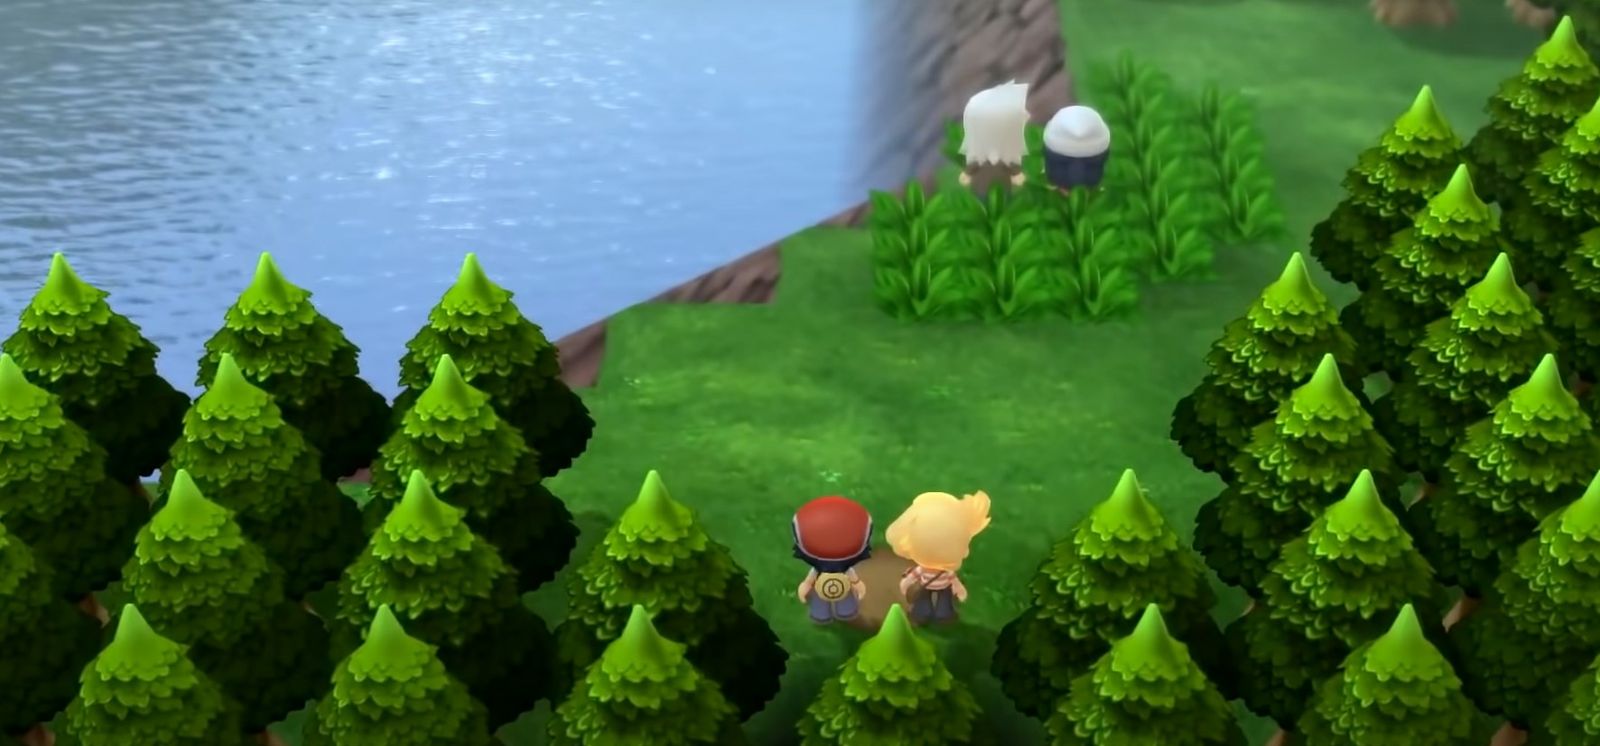 A Pokémon Trainer and their friend, plus Professor Rowan and another Trainer, at Lake Valor in Pokémon Brilliant Diamond and Shining Pearl.